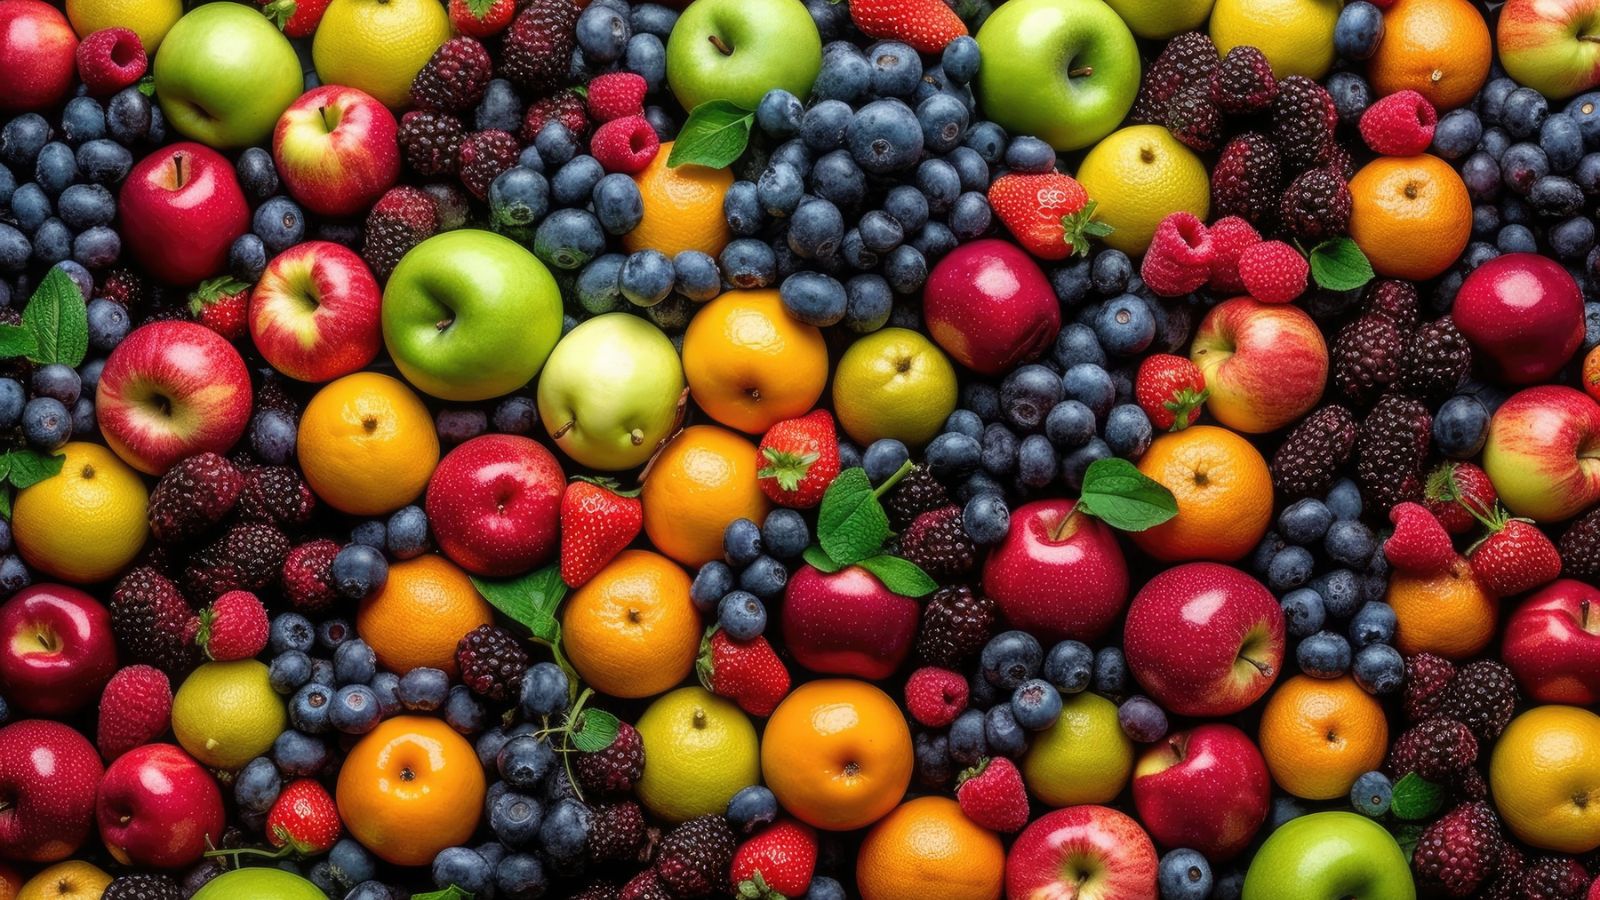 These 12 Fruits are the Best to Eat to Avoid High Blood Sugar